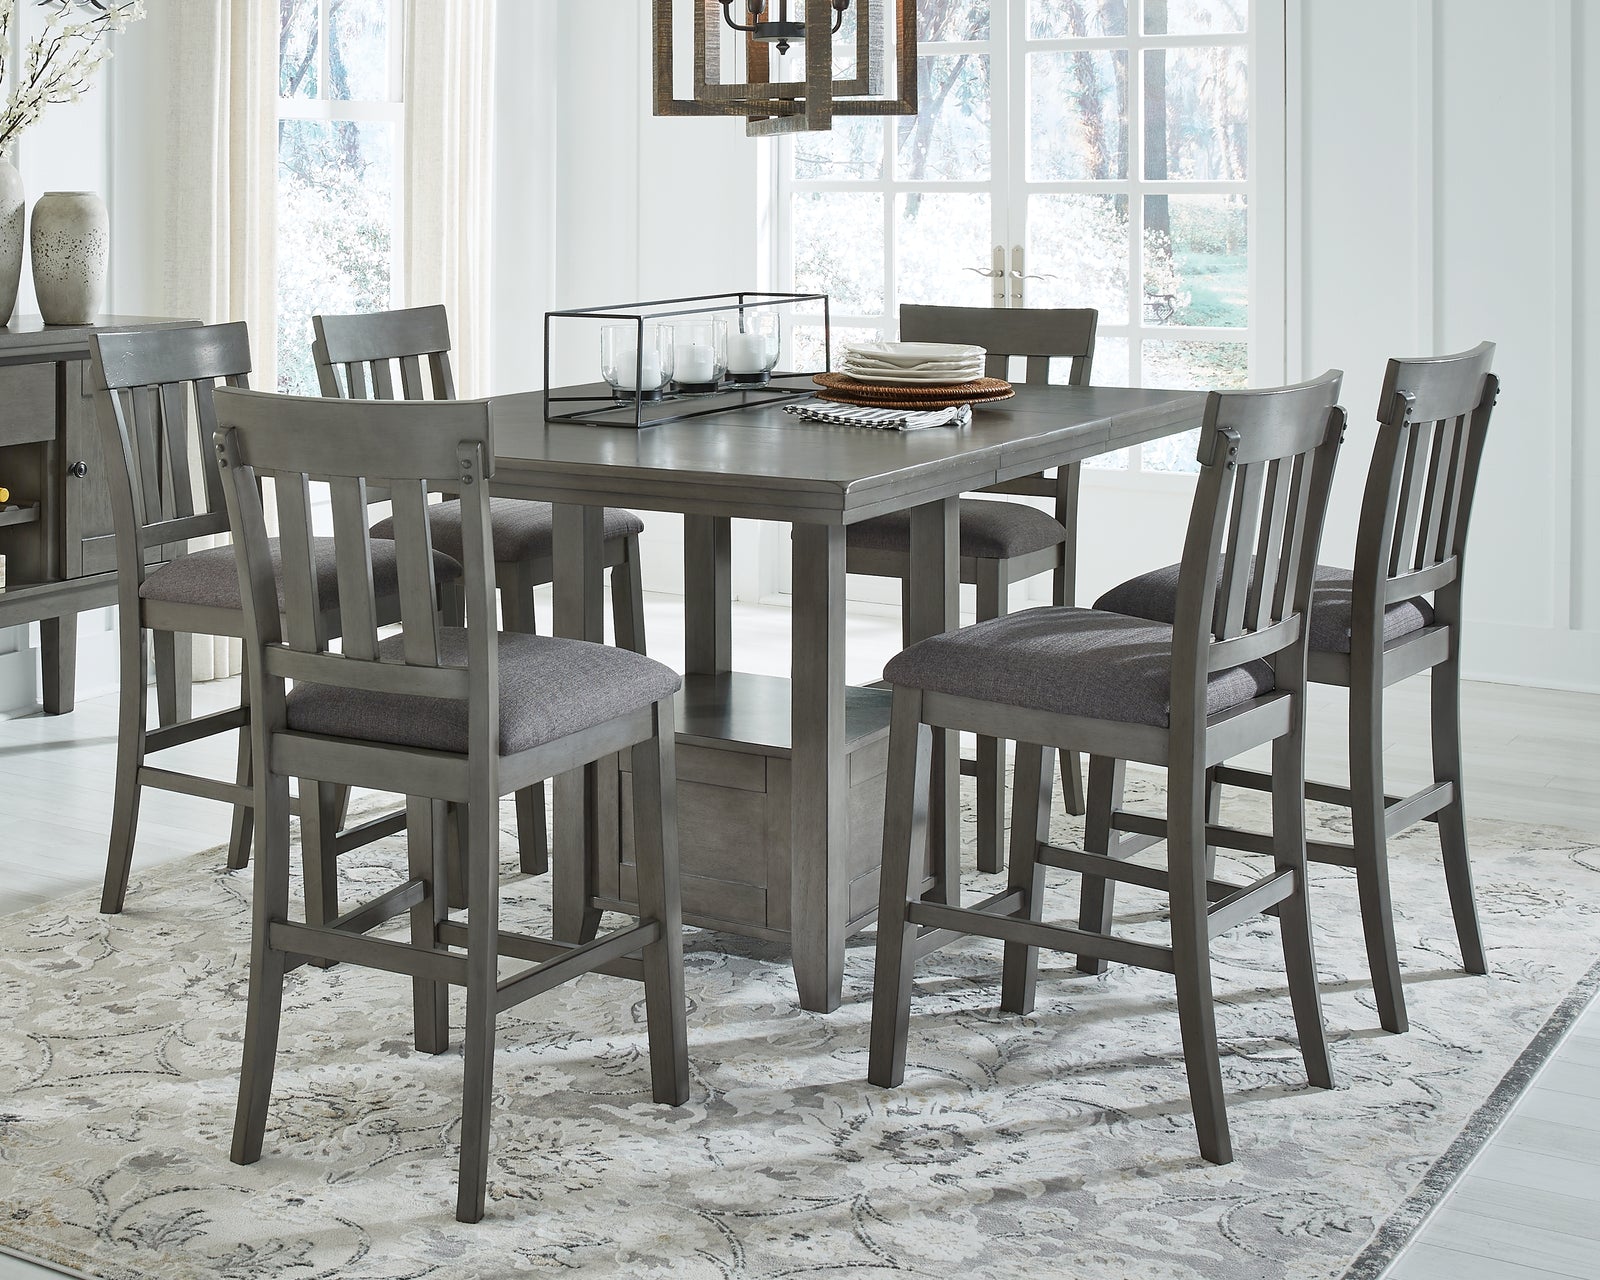 Hallanden Gray Counter Height Dining Table And 6 Barstools